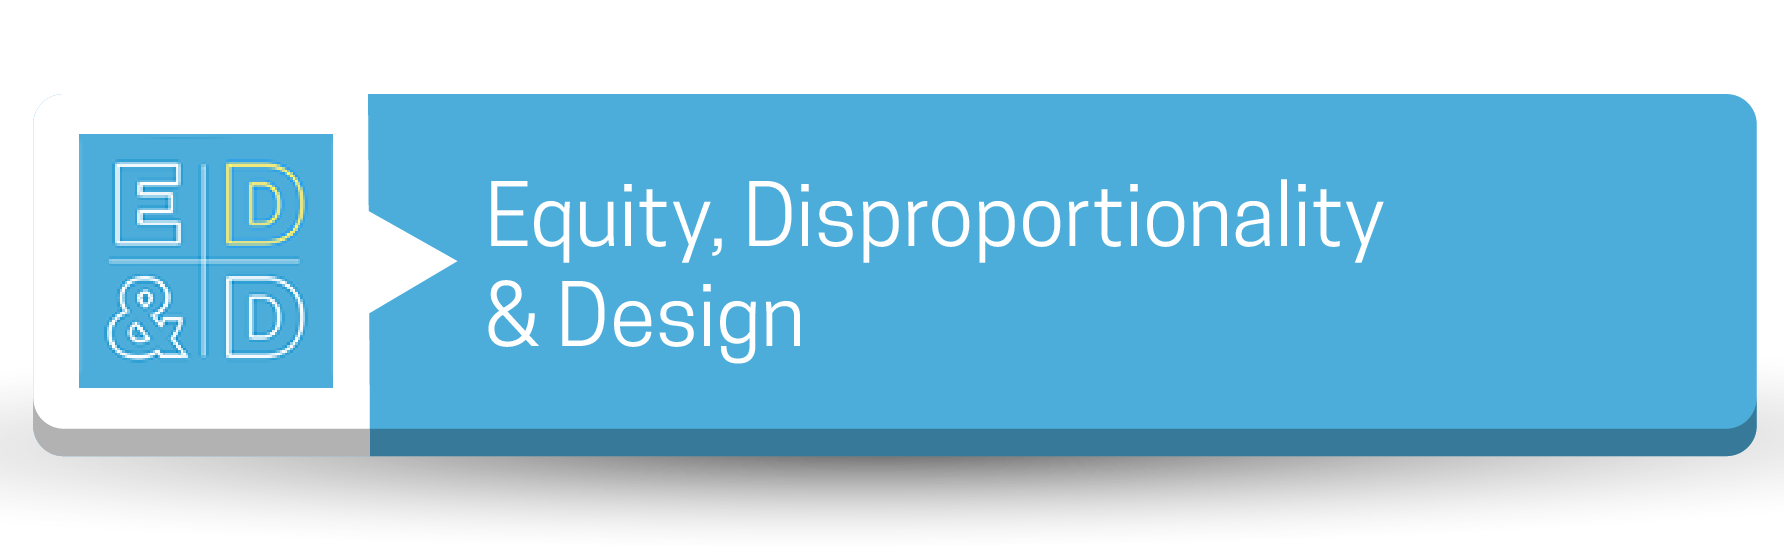 Equity, Disproportionality & Design Button